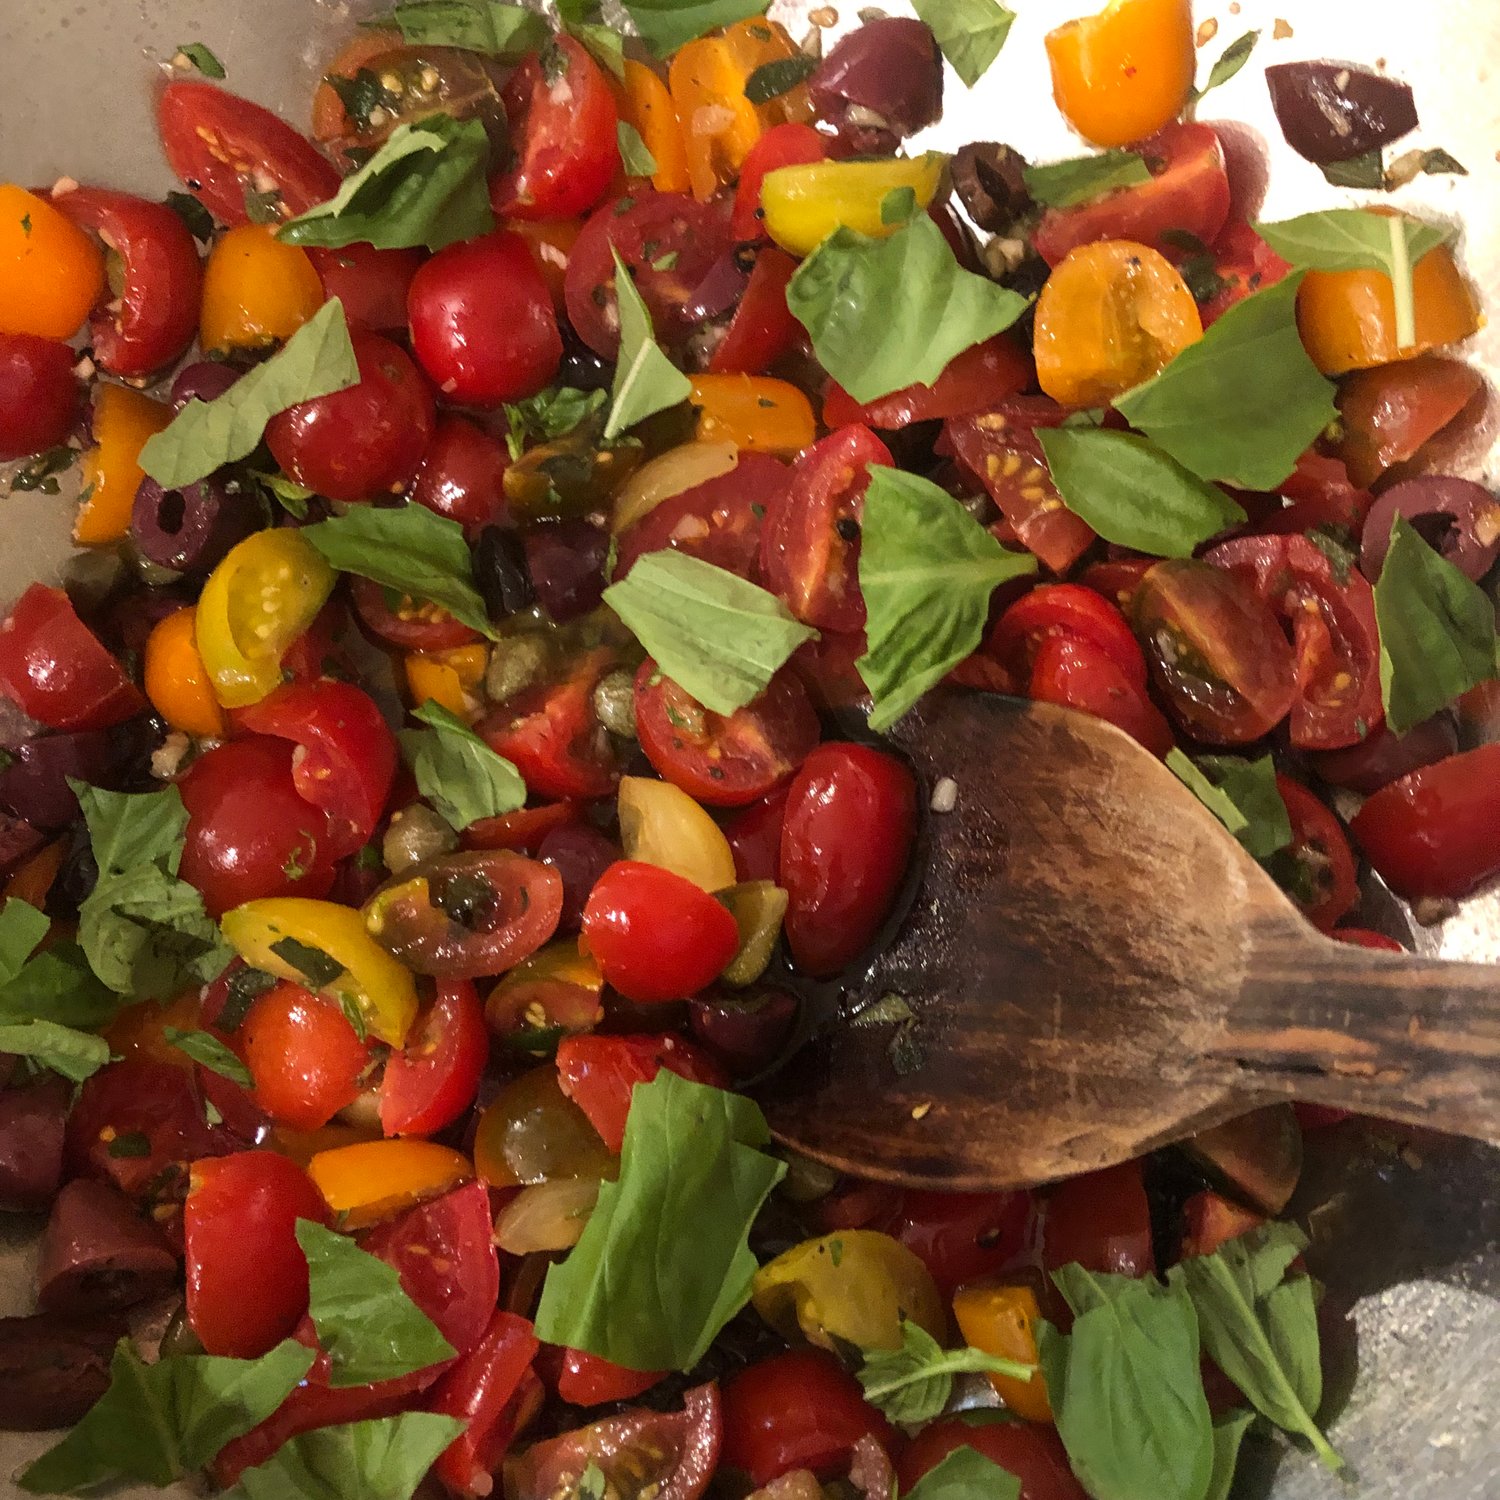 Tomatoes, olives, capers, basil and garlic marinate in olive oil before being mixed with fusilli and stracchino cheese.